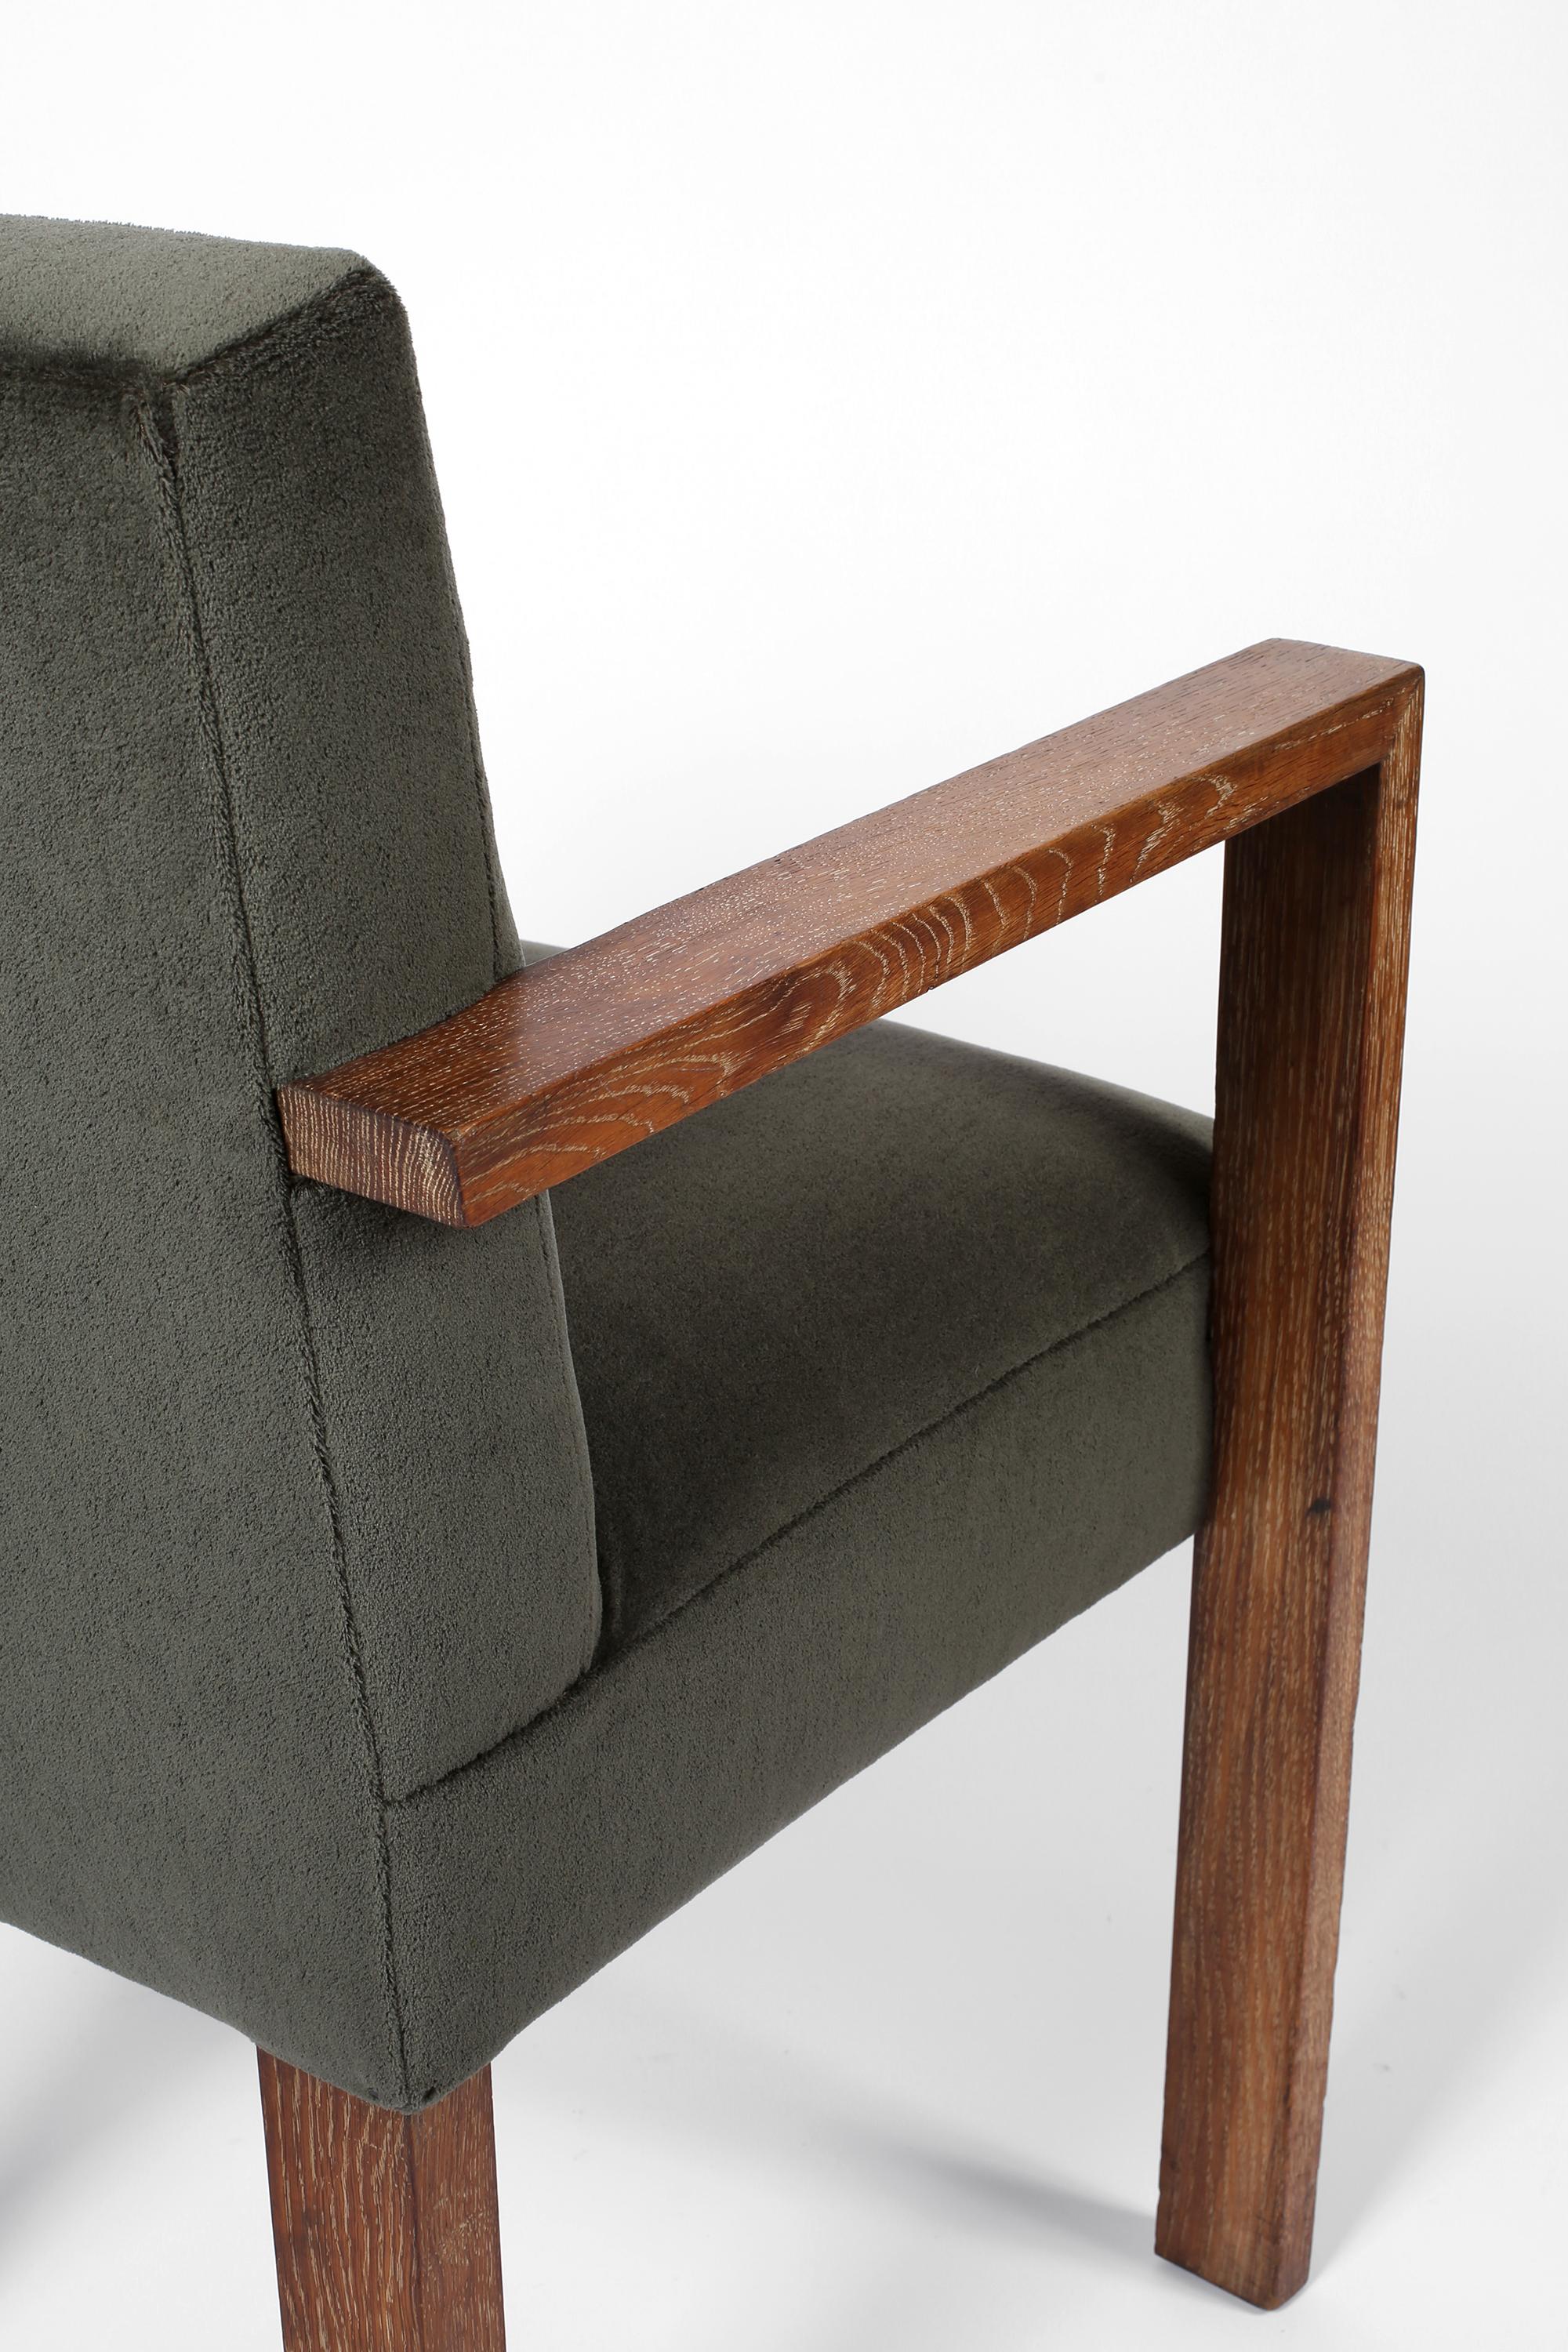 1940s French Modernist Armchair in Limed Oak and Mohair For Sale 3